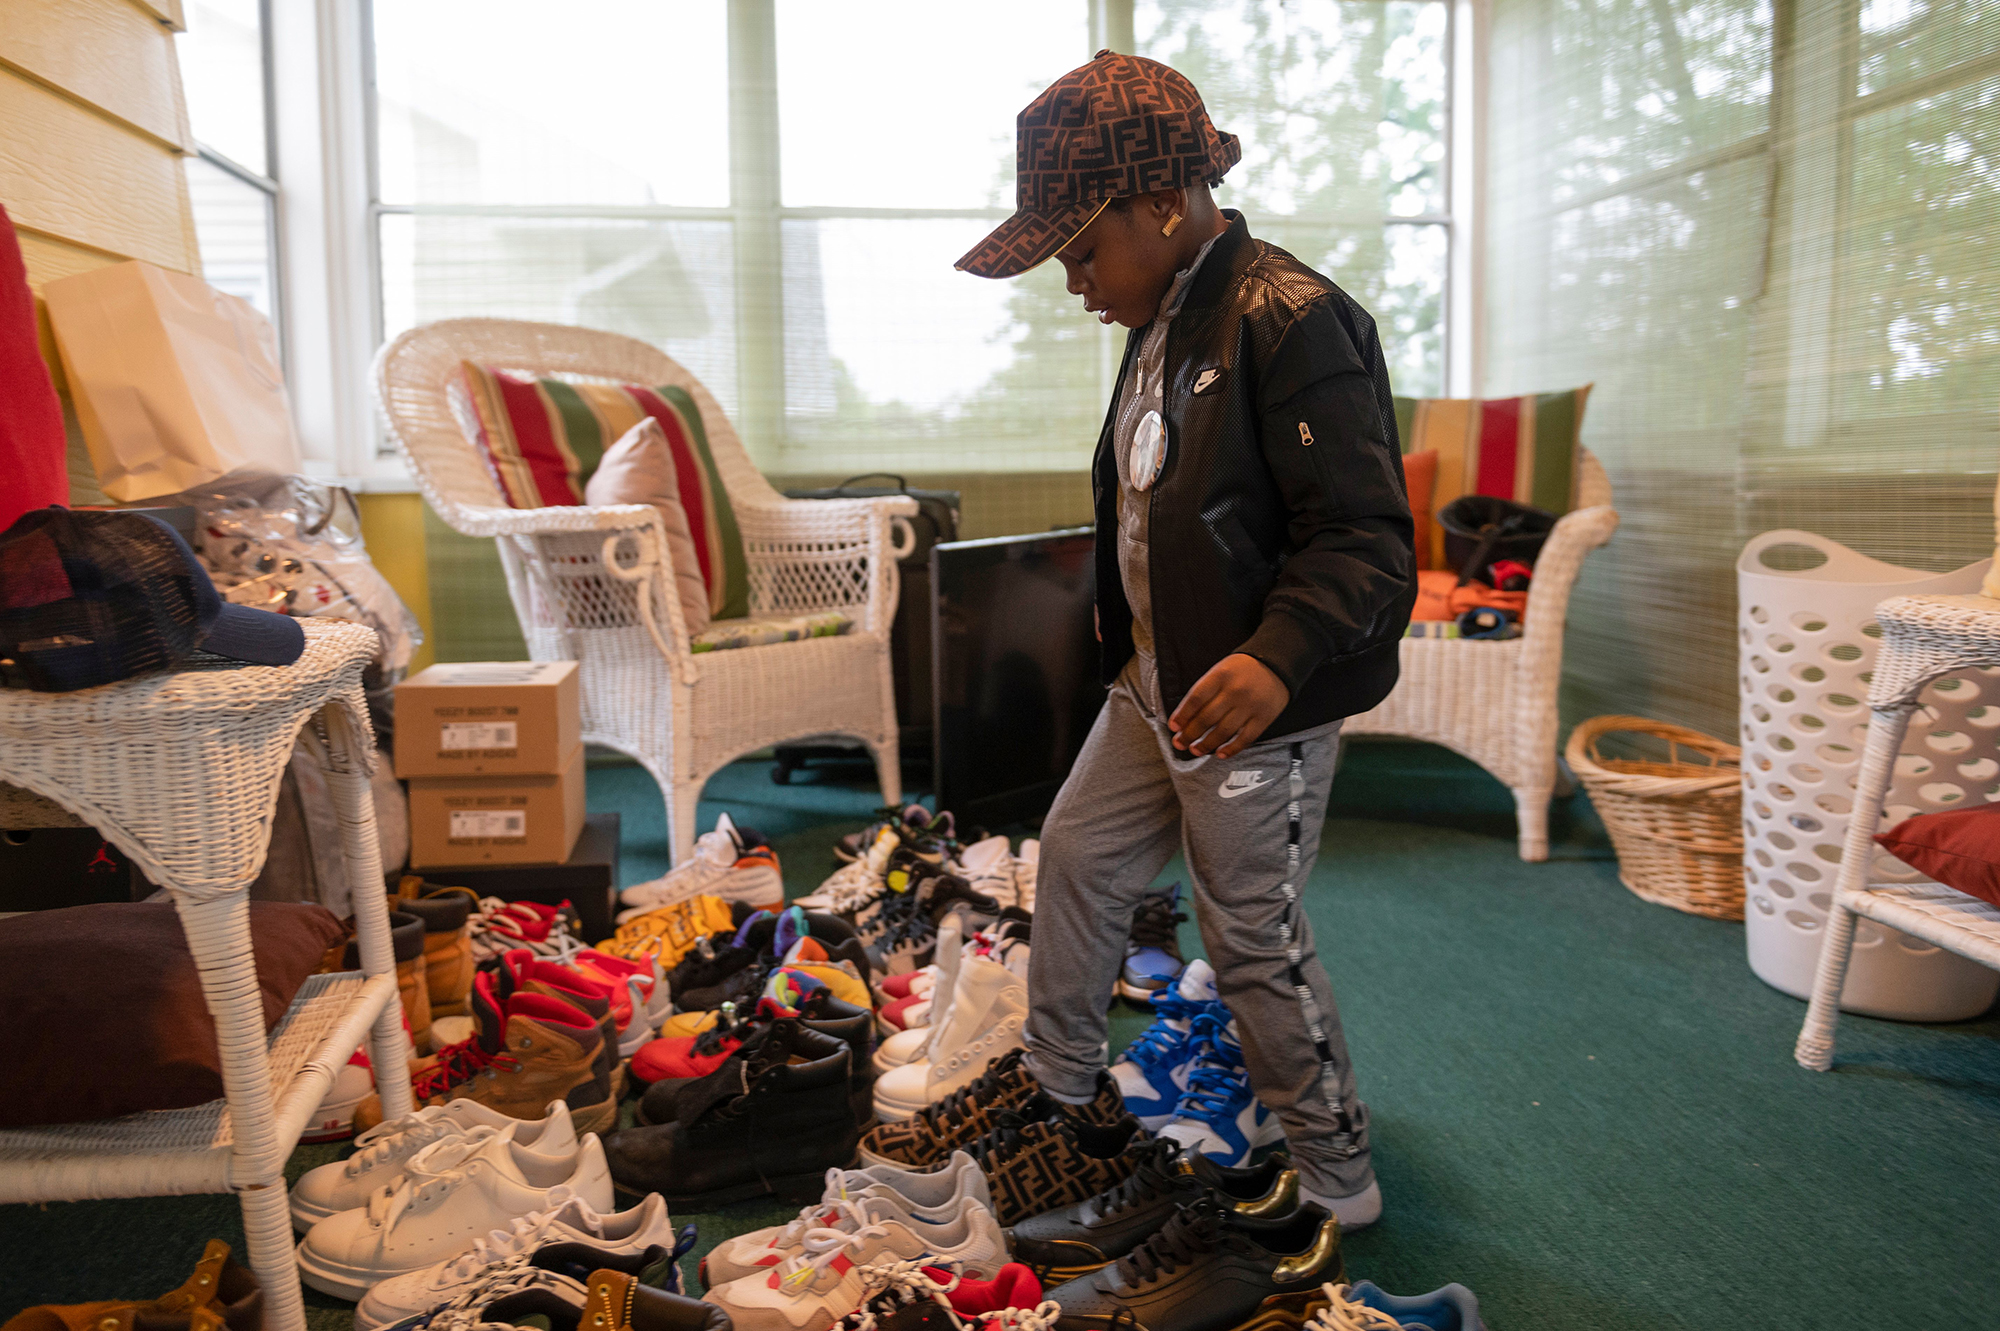 8-year-old Jamma tries on the sneakers of his late father.